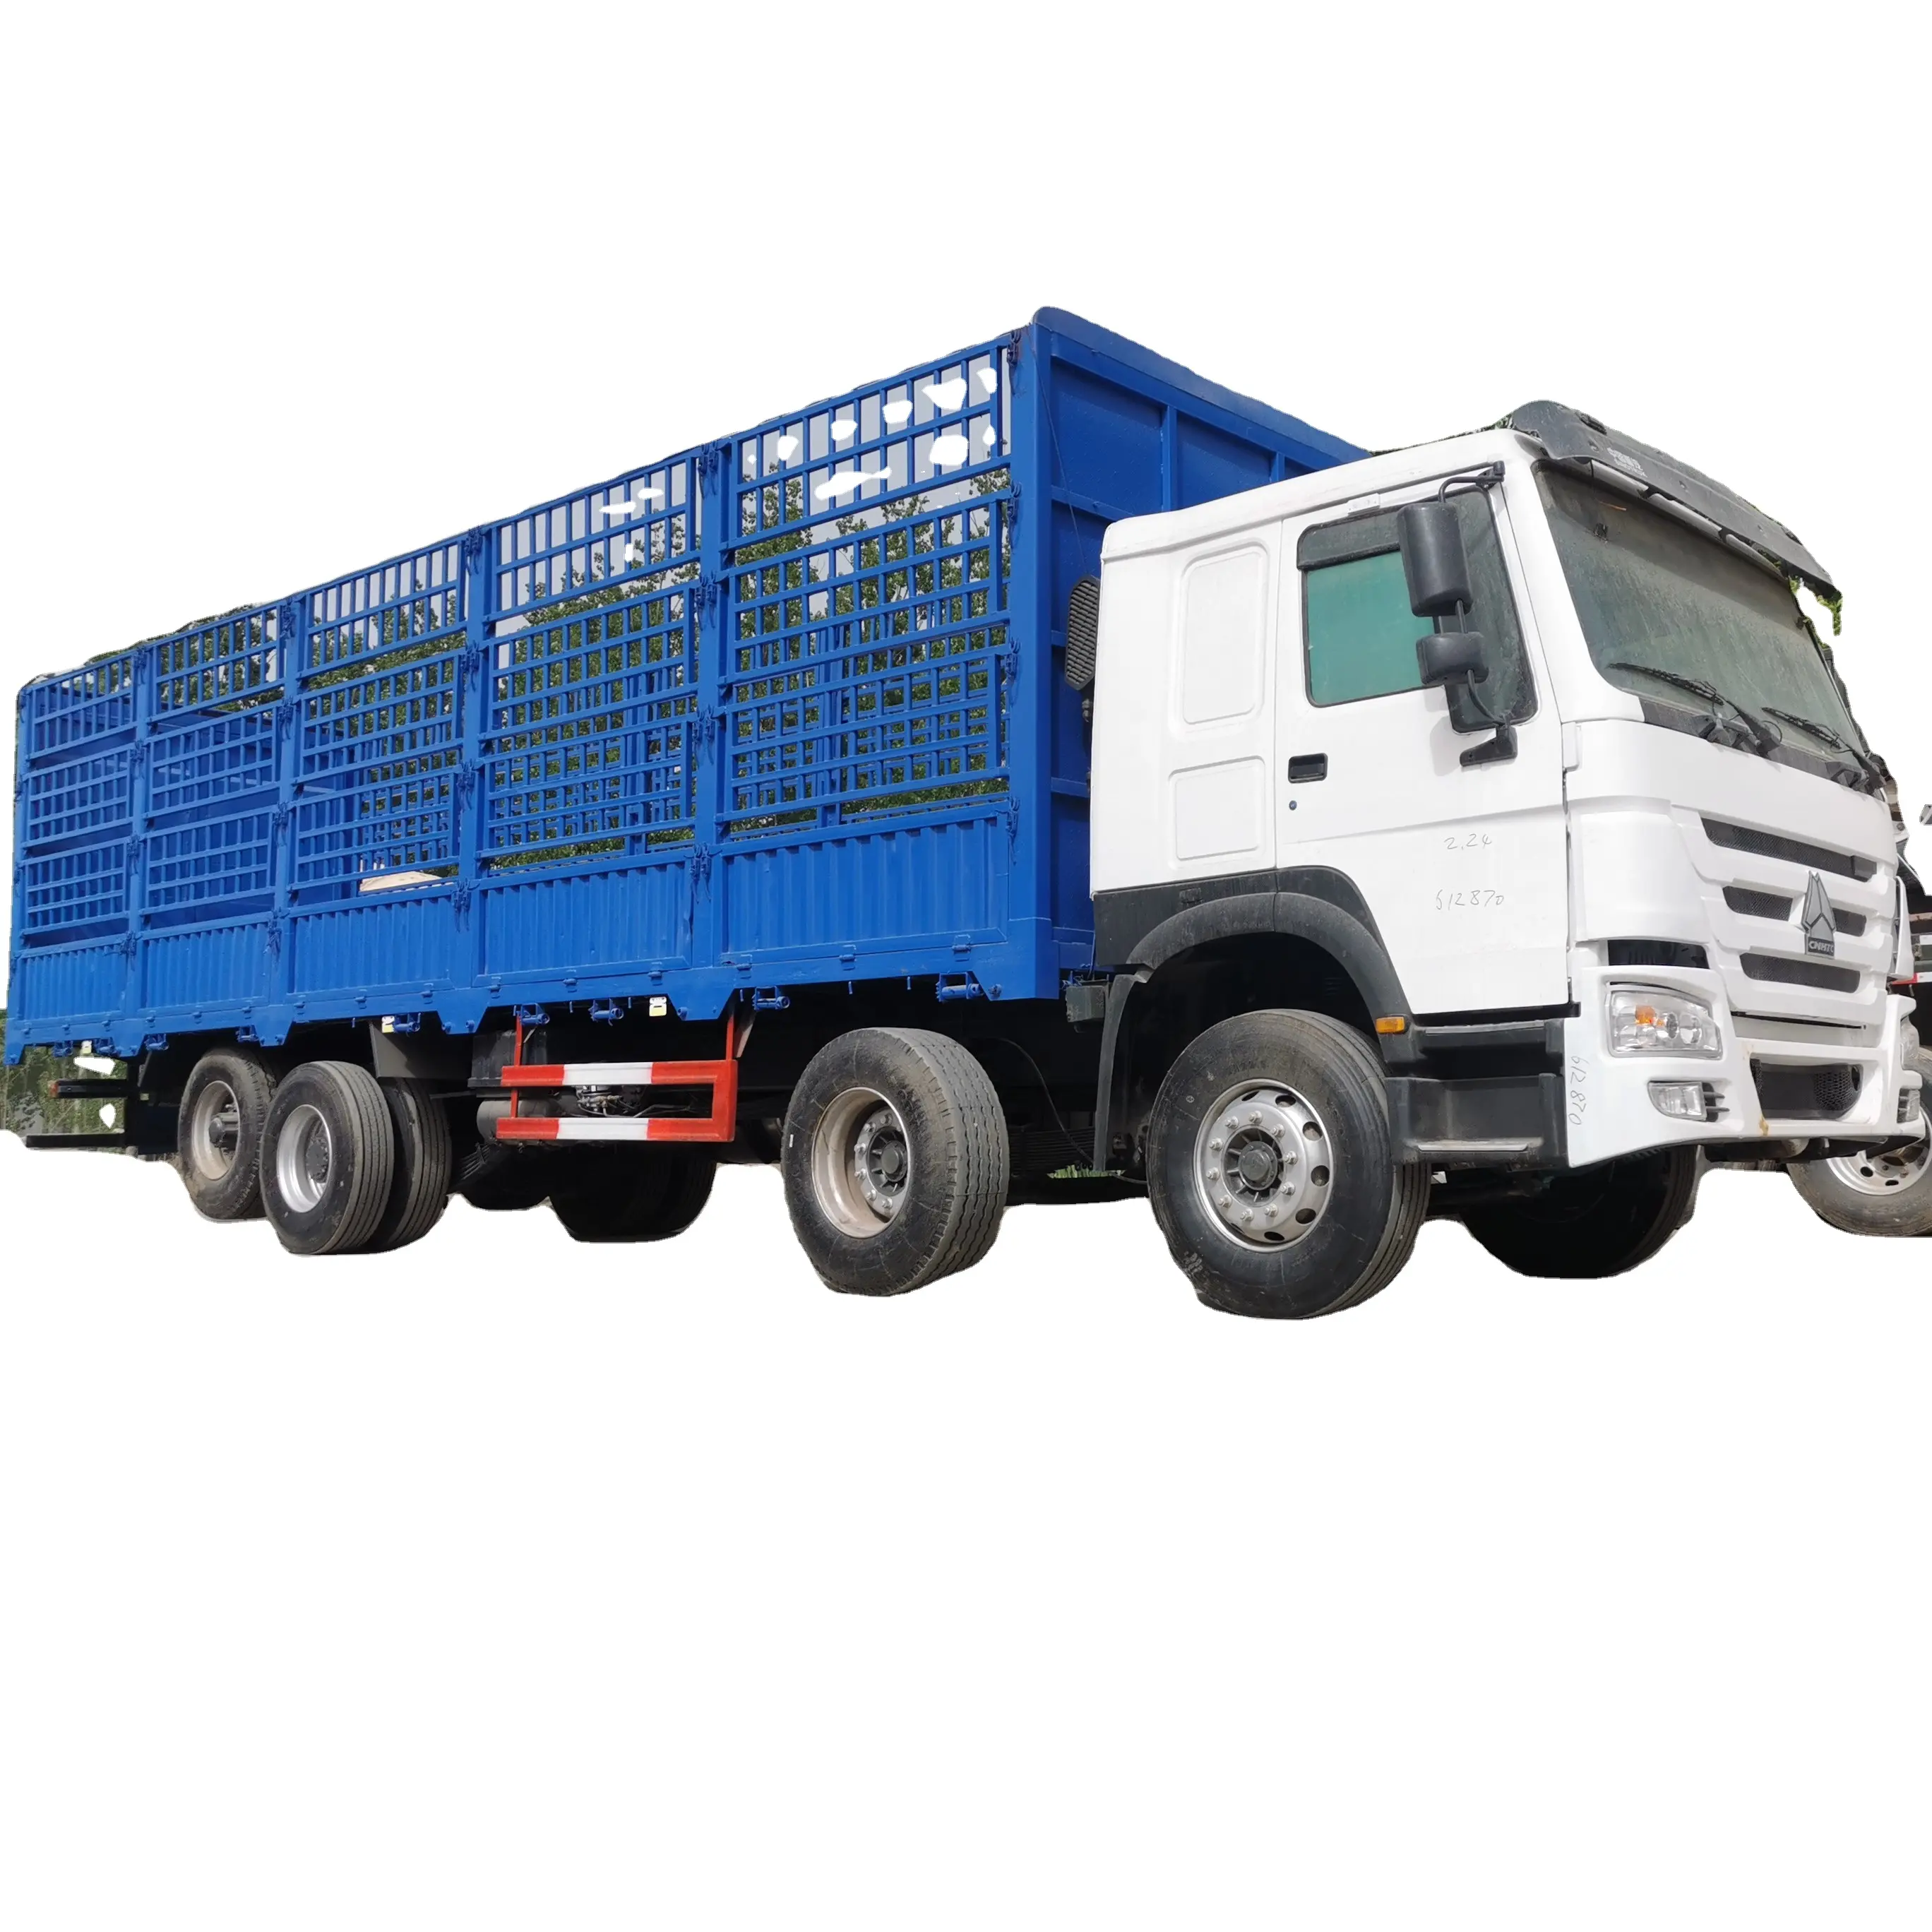 Cheap price 50 tons van cargo truck Sinotruk used fence trucks for sale